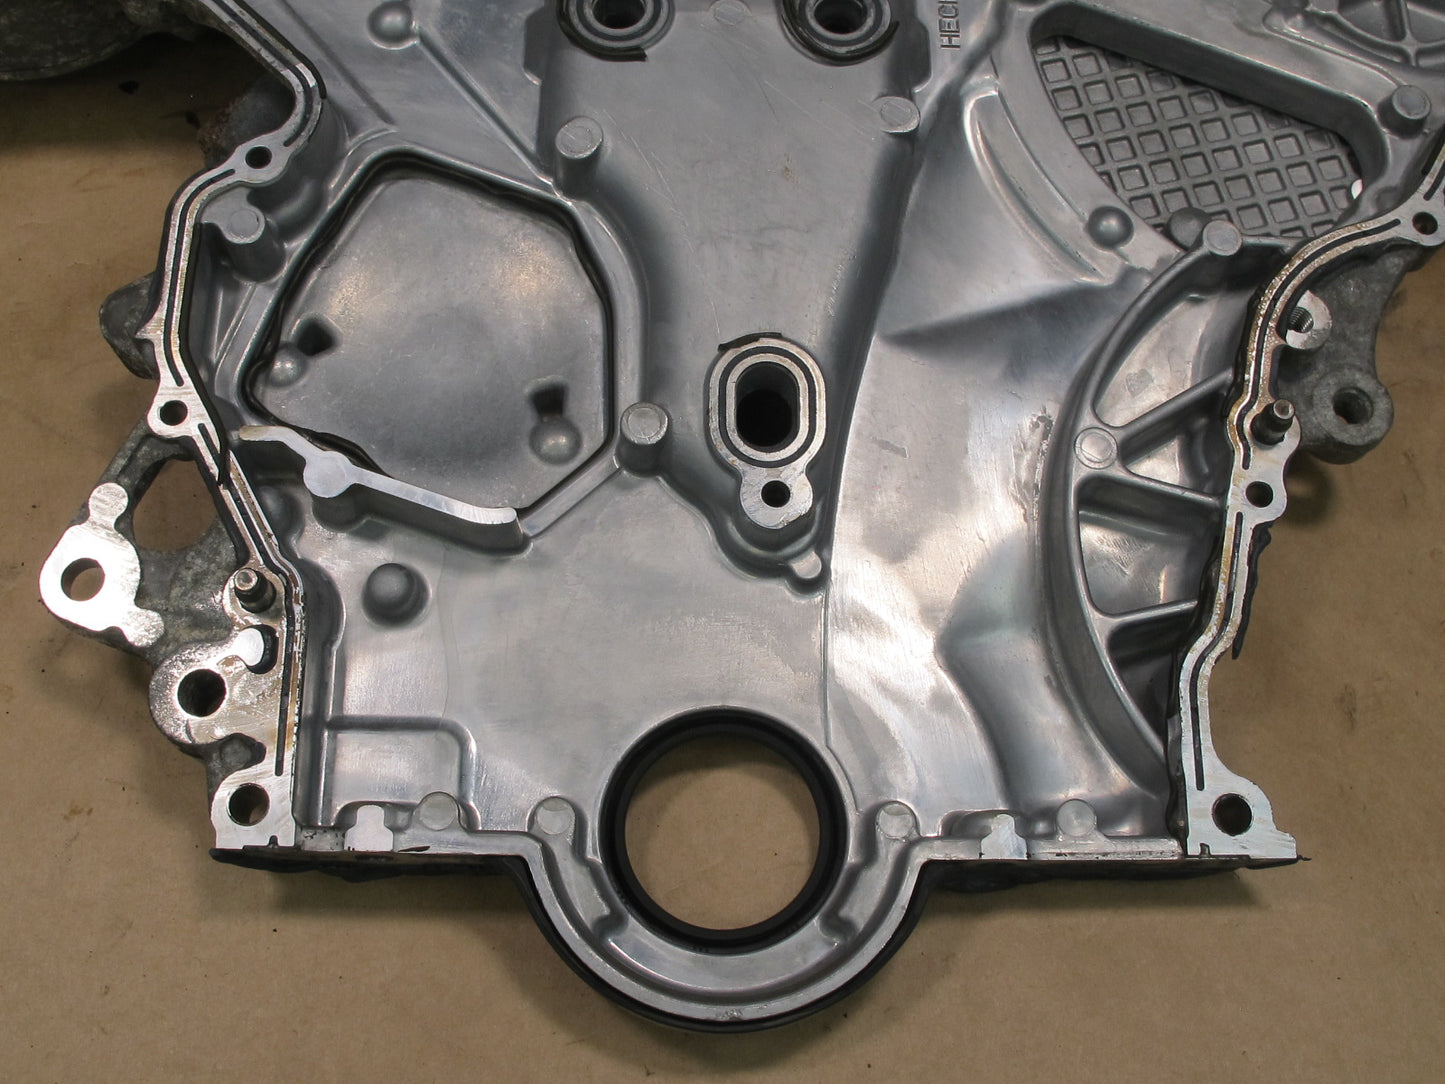 2013-2017 INFINITI QX60 JX35 3.5L FRONT ENGINE MOTOR TIMING CHAIN COVER